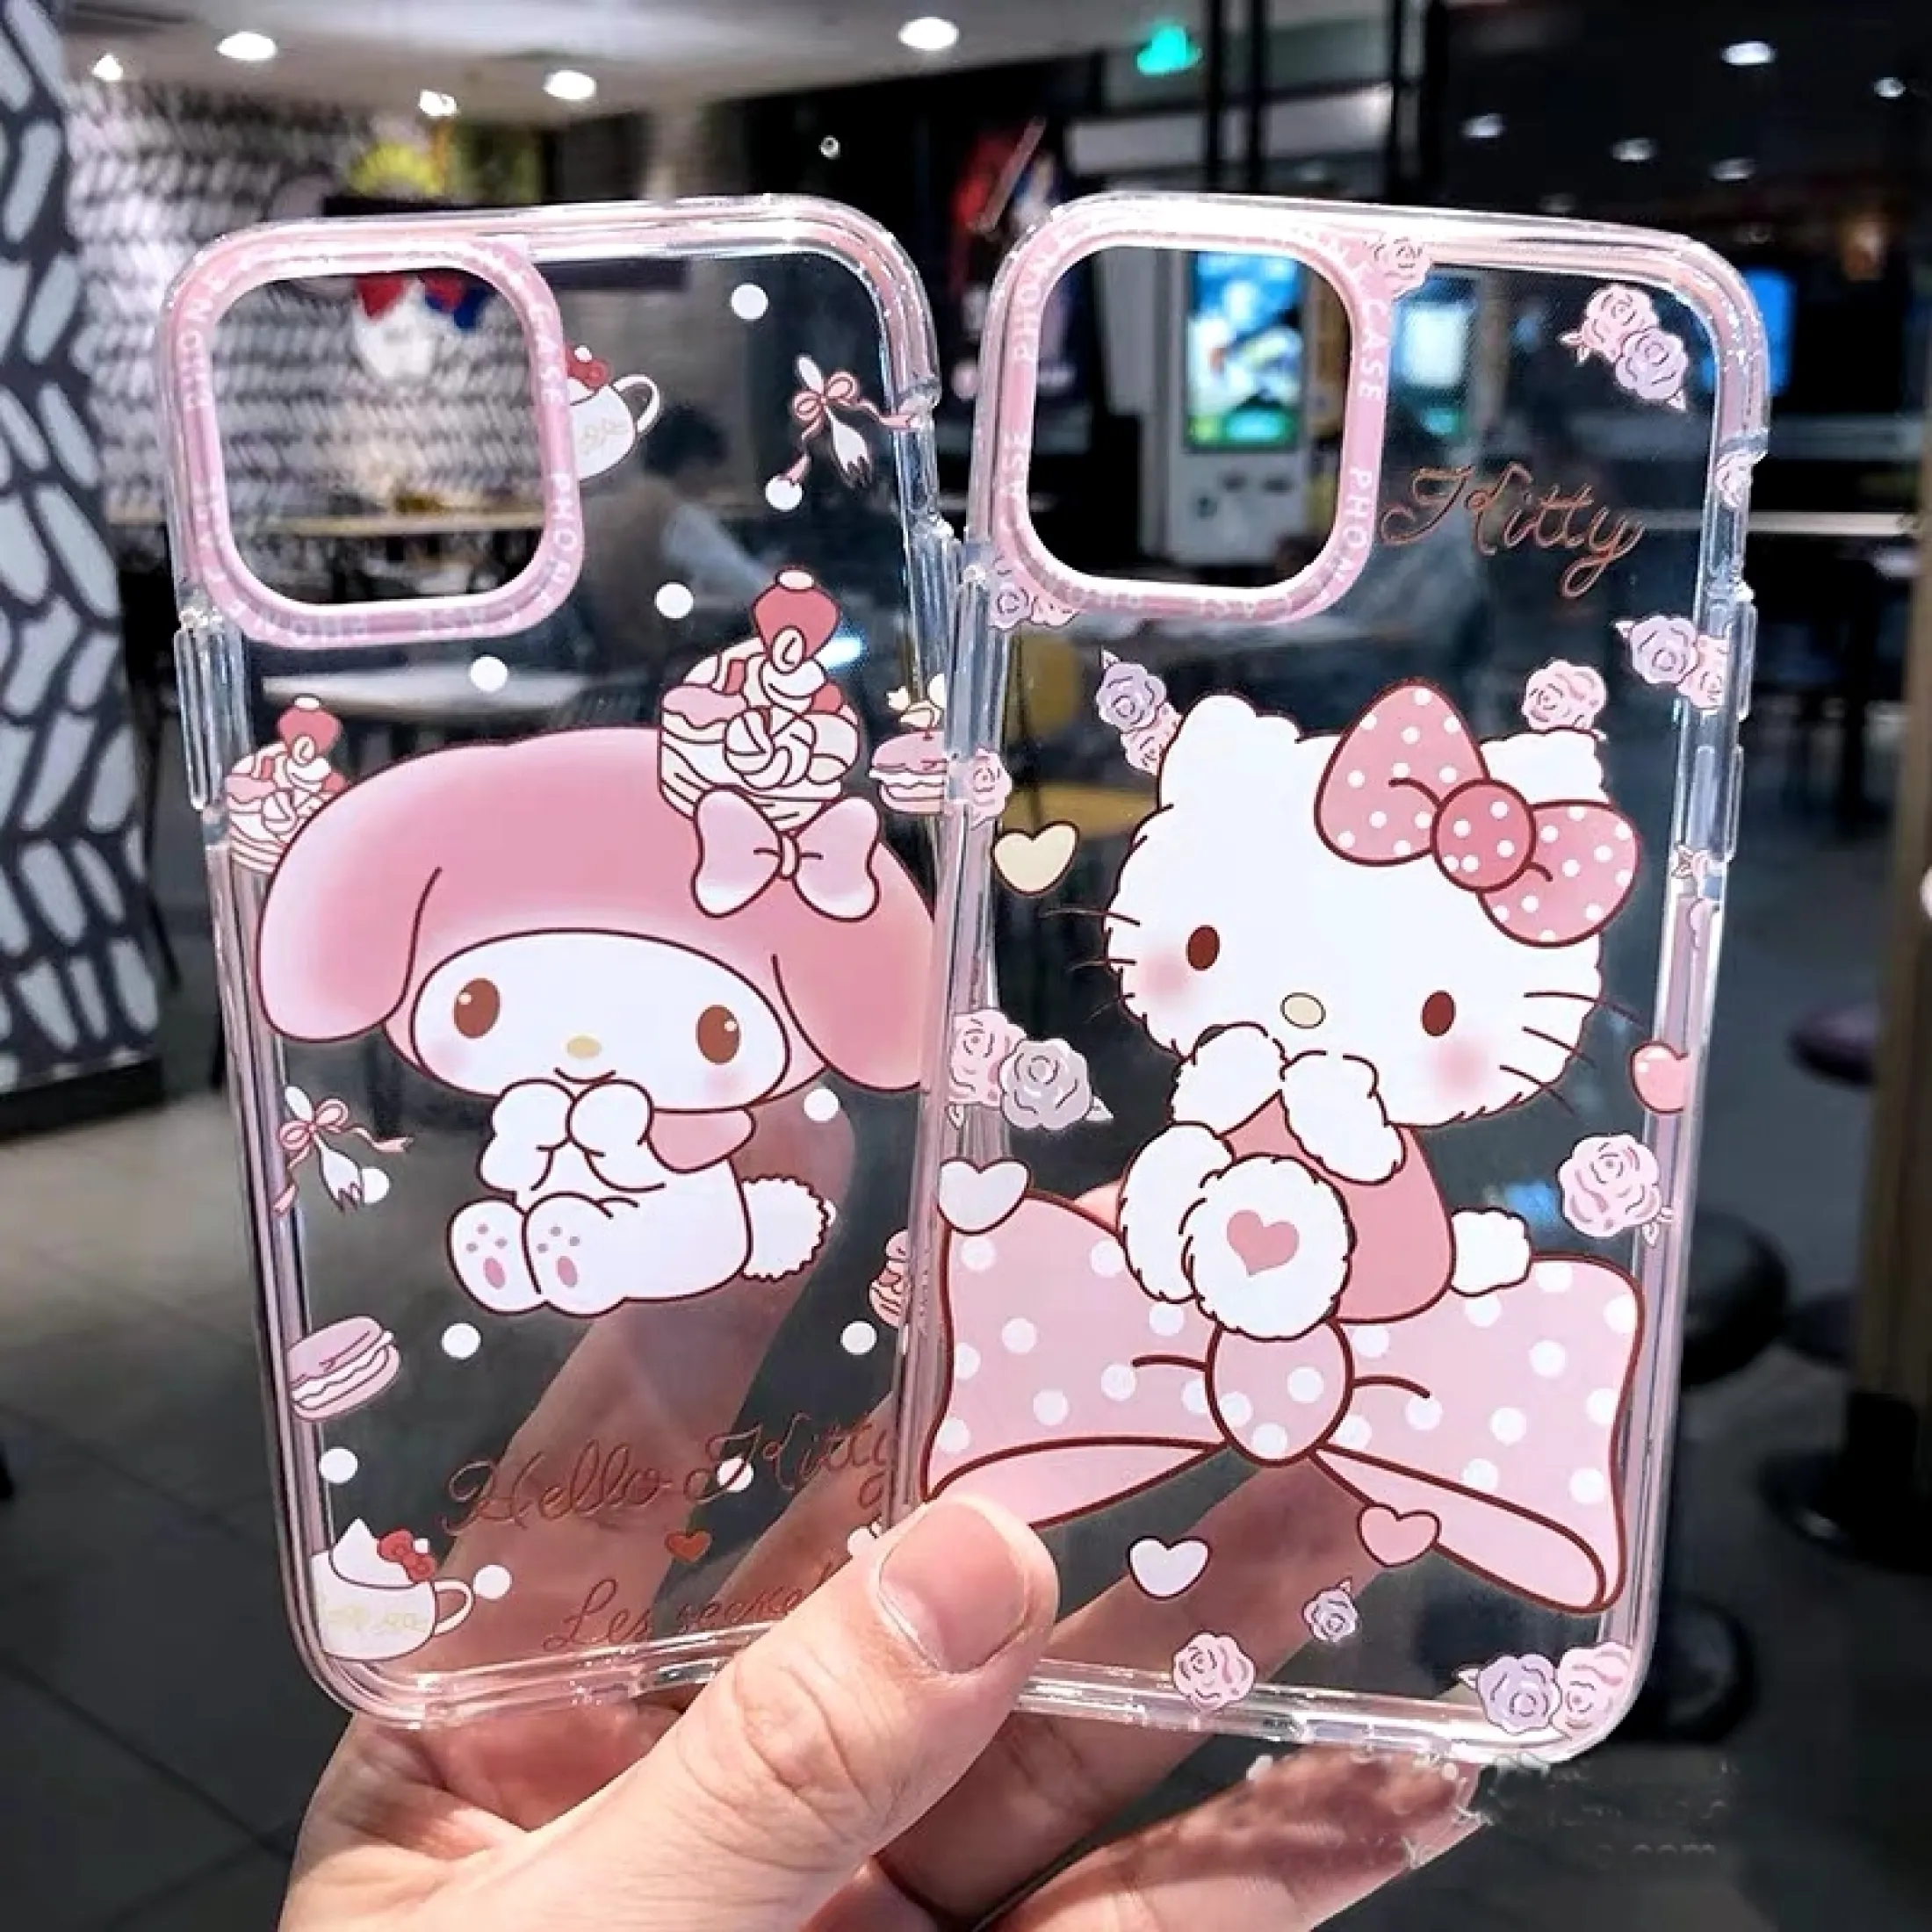 Cartoon Cute My Melody Hello Kitty Mobile Phone Case For Iphone 12 Pro Max Case 12 Mini 11 Pro Max Case 8 7 Plus Soft Phone Back Cover For Iphone X Xr